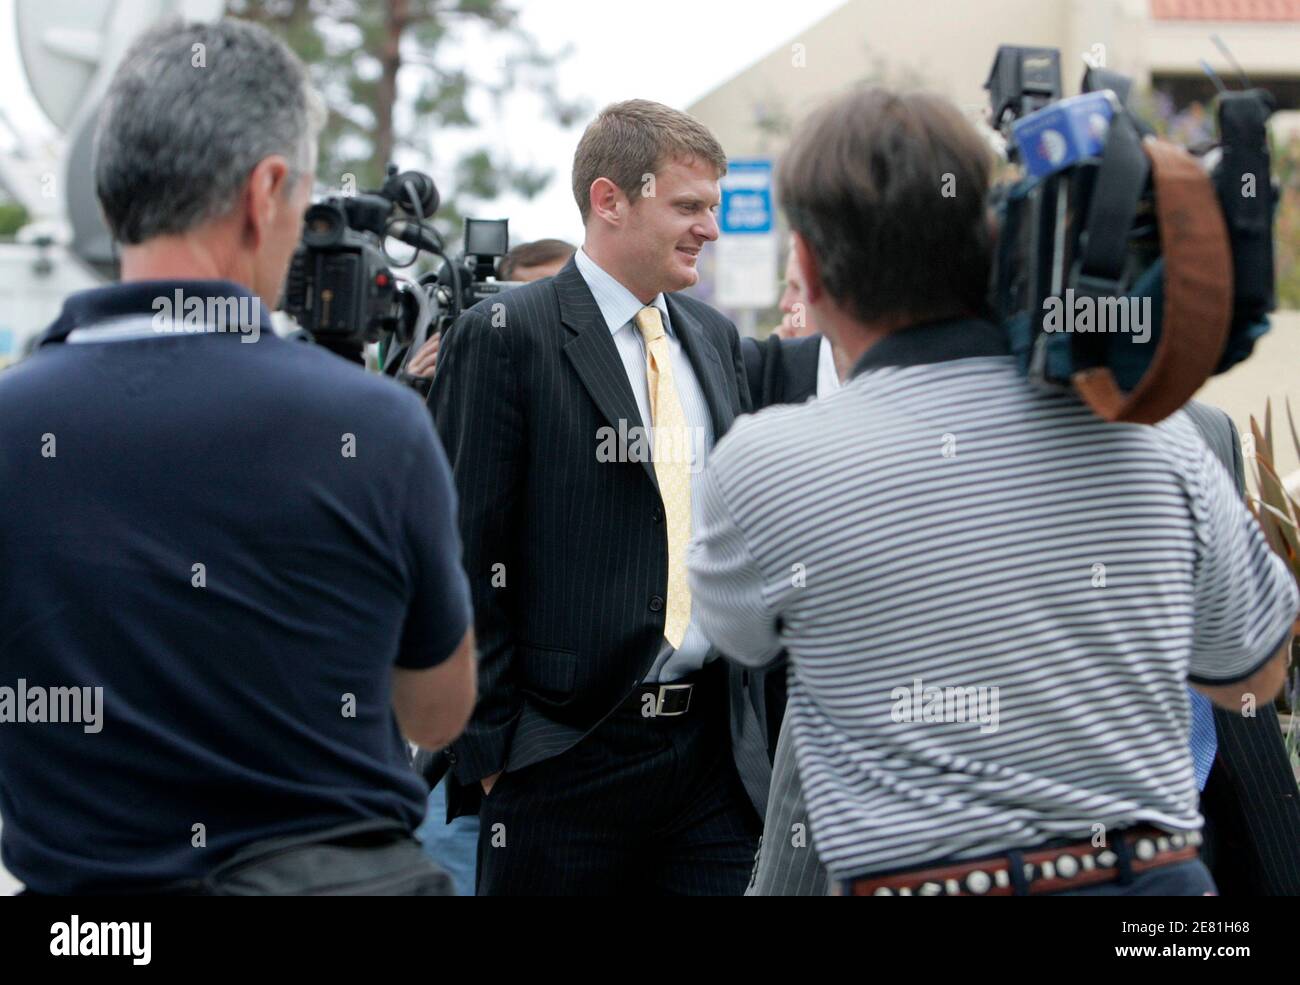 U.S. cyclist Floyd Landis leaves the Pepperdine University School of Law after an arbitration hearing in Malibu, California, May 21, 2007. The arbitrators are considering a case brought against Landis by the U.S. Anti-Doping Agency alleging the cyclist used illicit performance-enhancing drugs. He faces a possible two-year suspension and loss of his Tour de France title. REUTERS/Danny Moloshok (UNITED STATES) Stock Photo